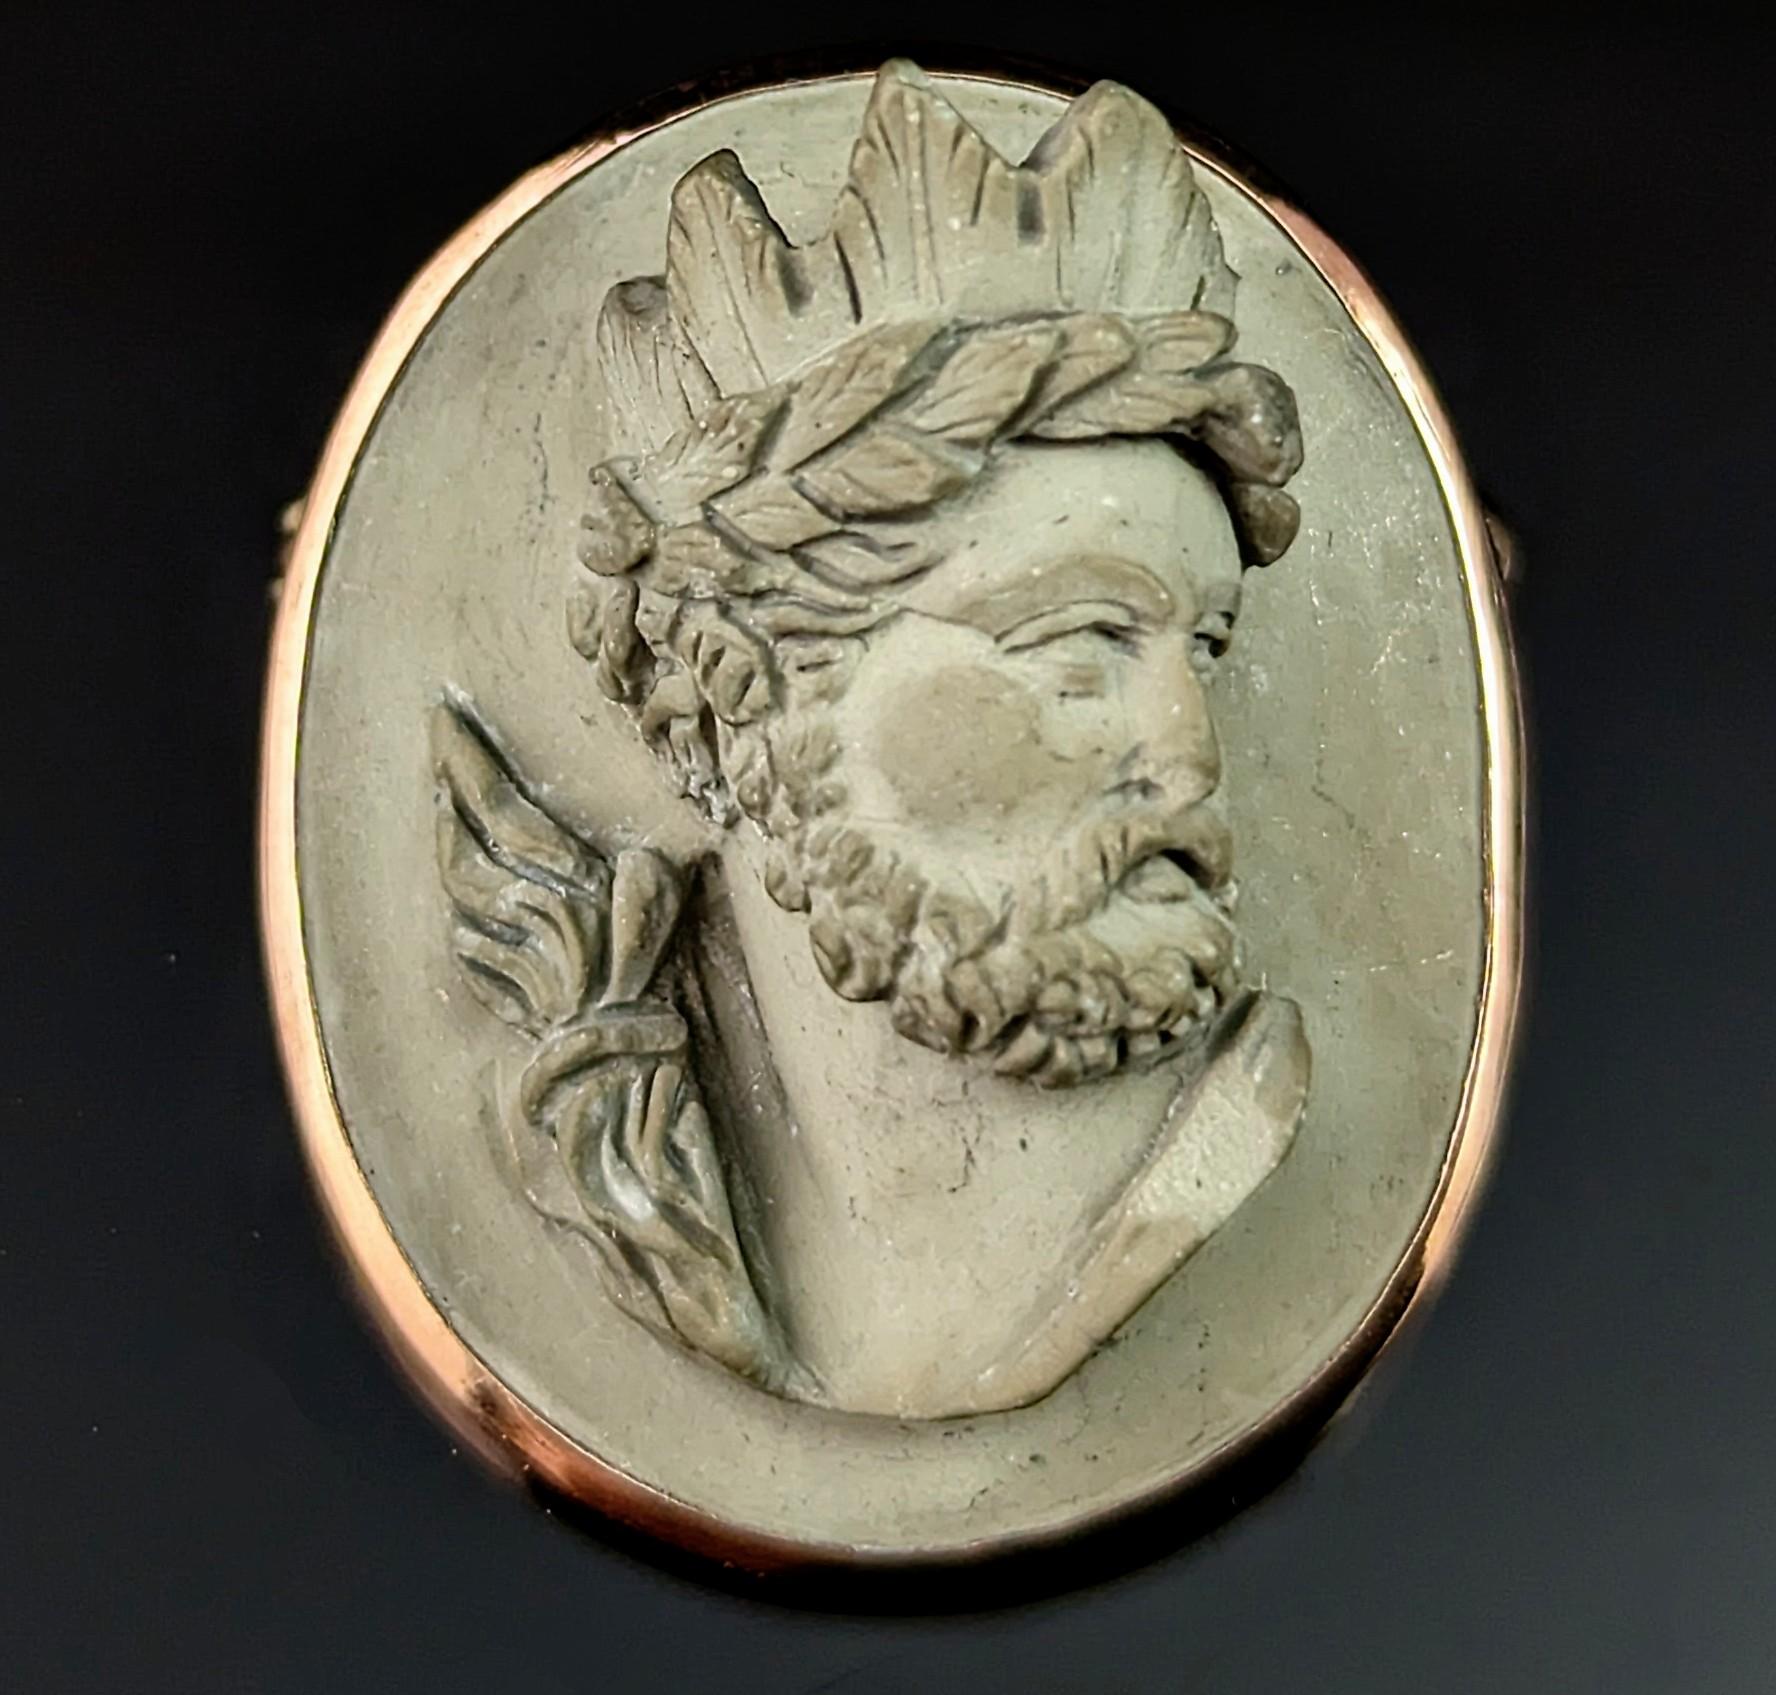 This beautiful antique, late 19th century Lava Cameo brooch is a little different and unique.

It is very finely carved as the bust of Helios, an unusual subject and not one I have seen on a lava cameo before.

Helios is the God and personification